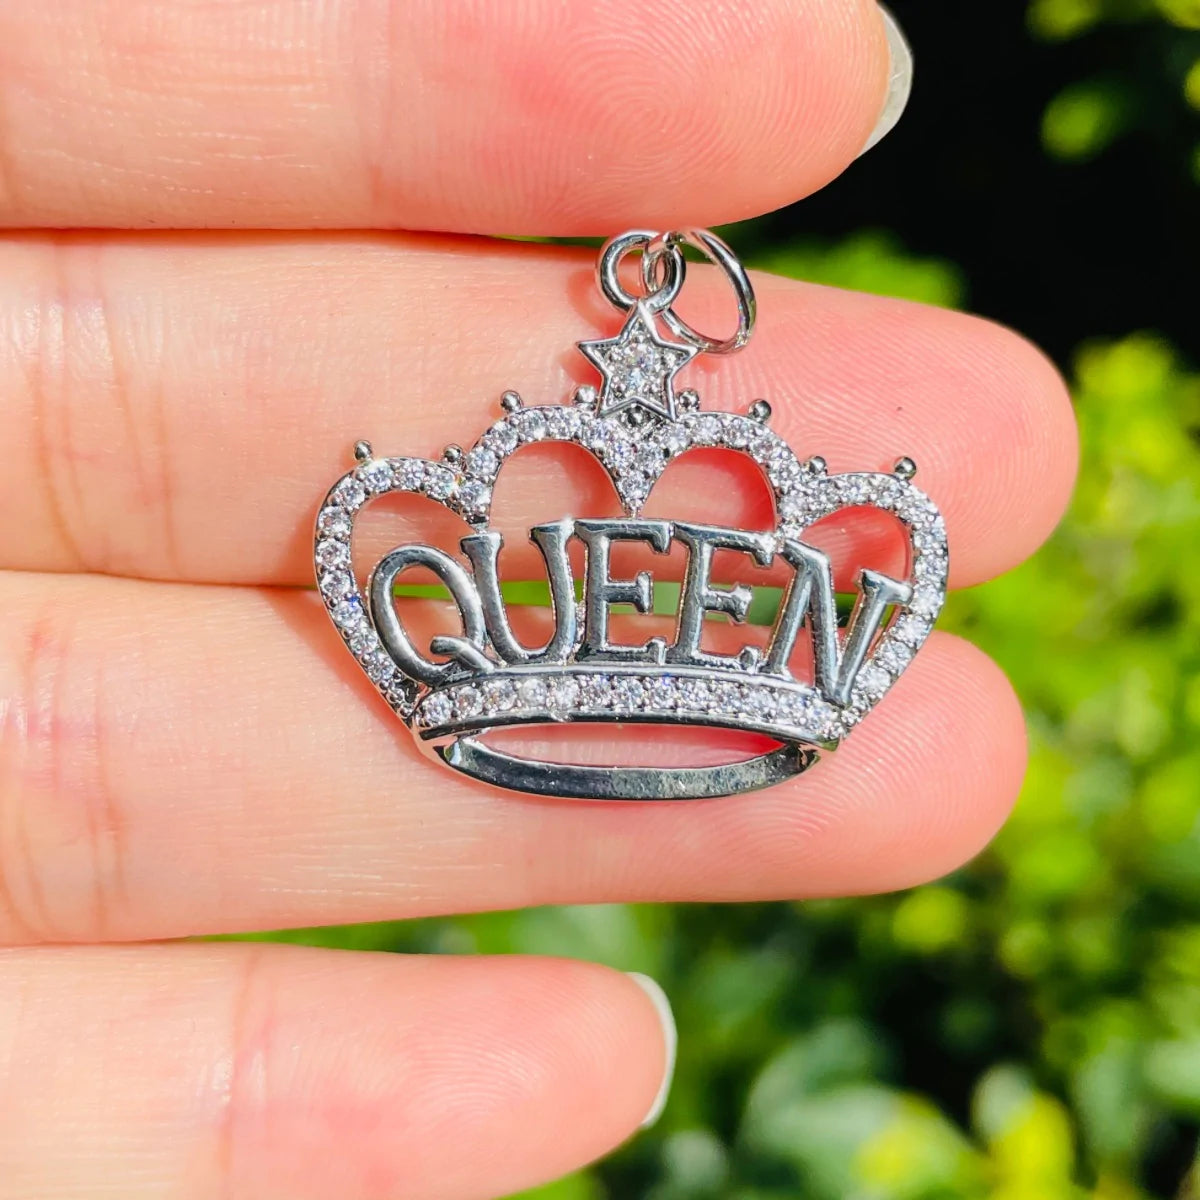 10pcs/lot 28*25mm CZ Paved Crown Queen Word Charms Silver CZ Paved Charms Crowns New Charms Arrivals Queen Charms Charms Beads Beyond